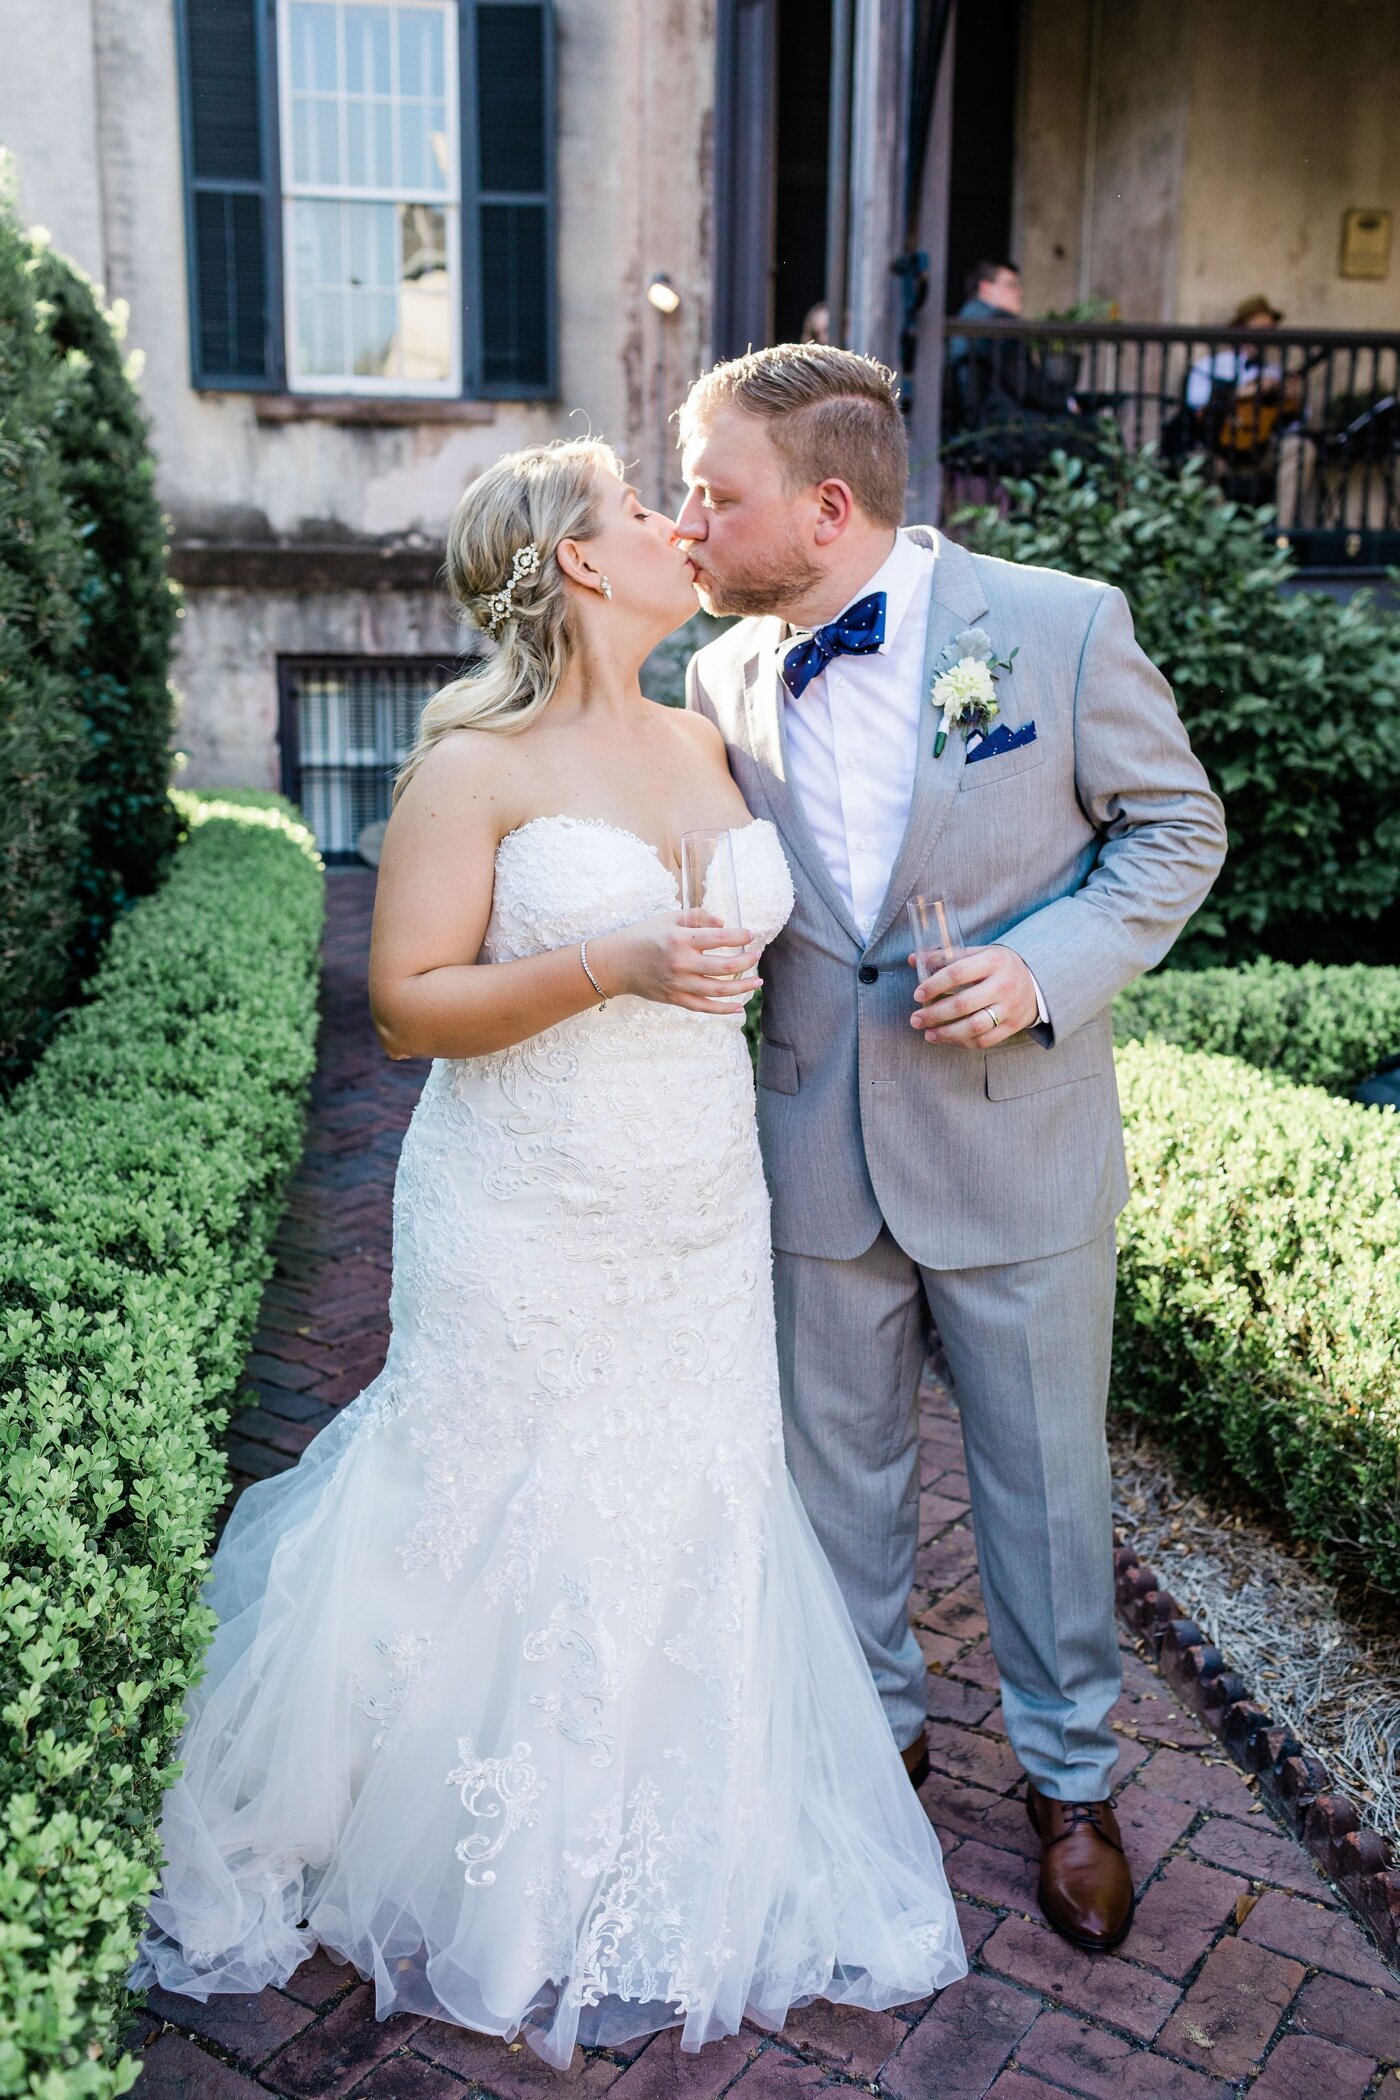 Morgan and Andrew’s wedding ceremony at Harper Fowlkes House in Savannah